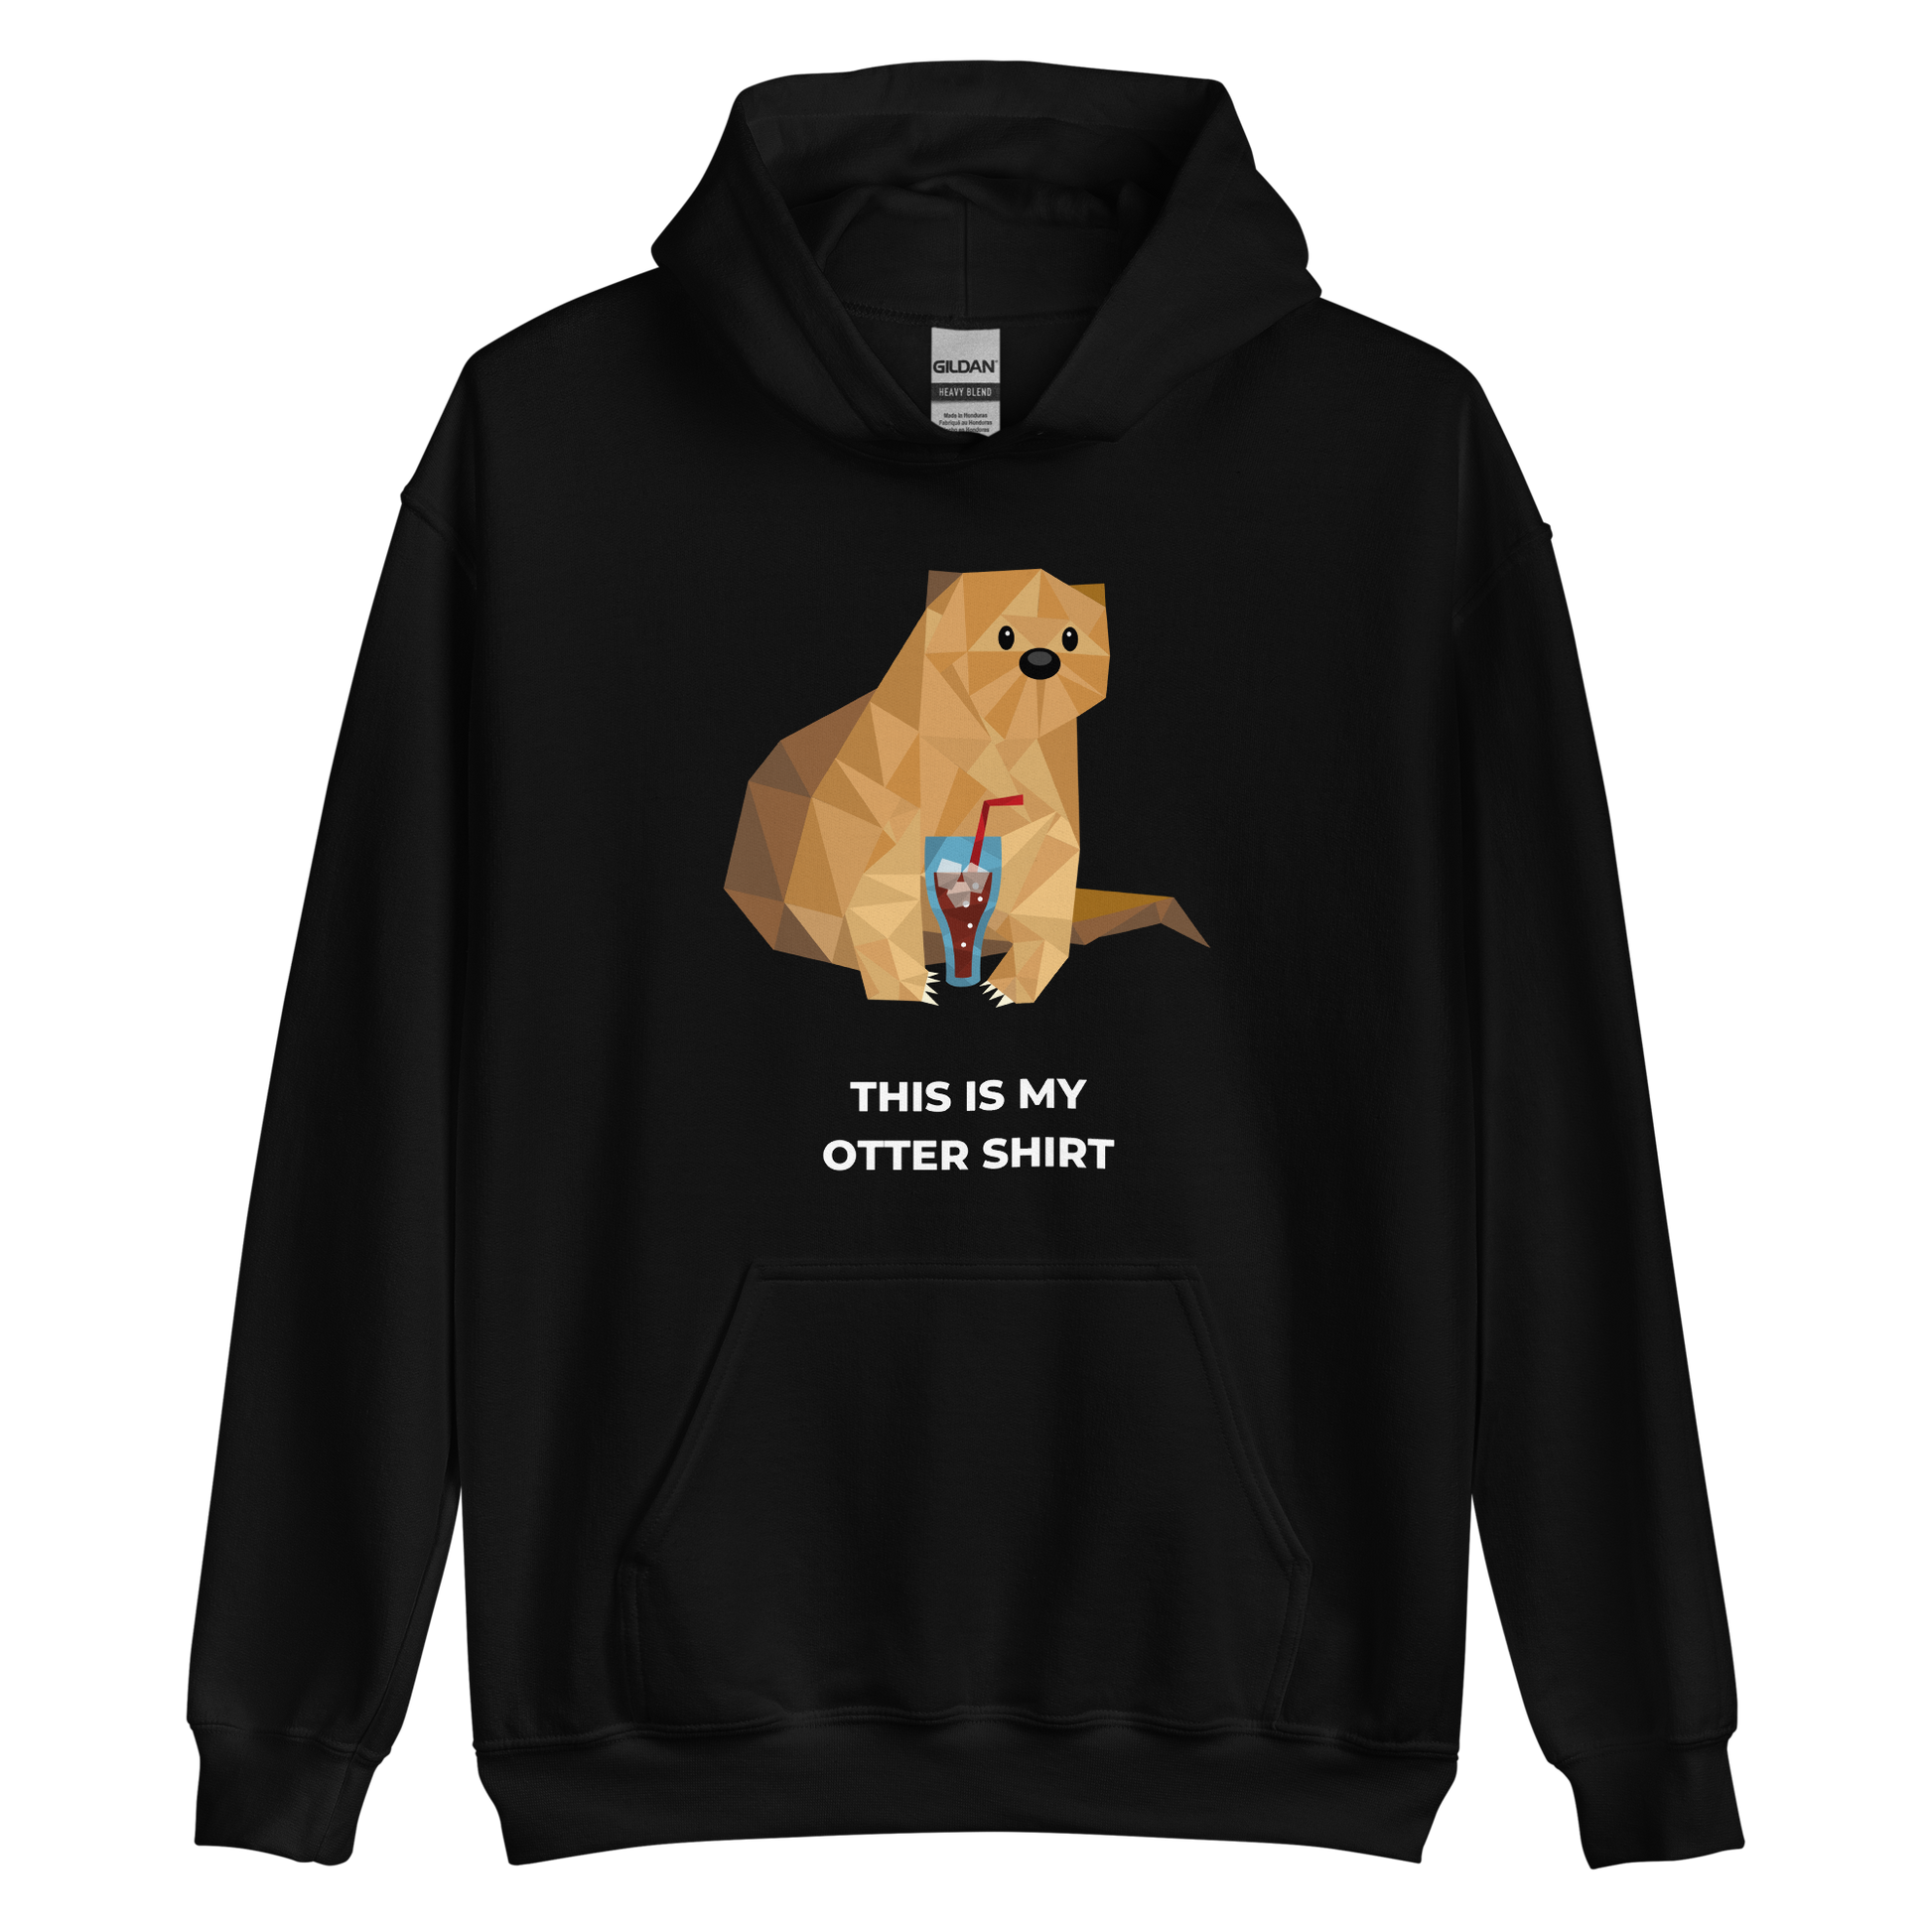 Black Otter Hoodie featuring an adorably playful This Is My Otter Shirt graphic on the chest - Funny Graphic Otter Hoodies - Boozy Fox